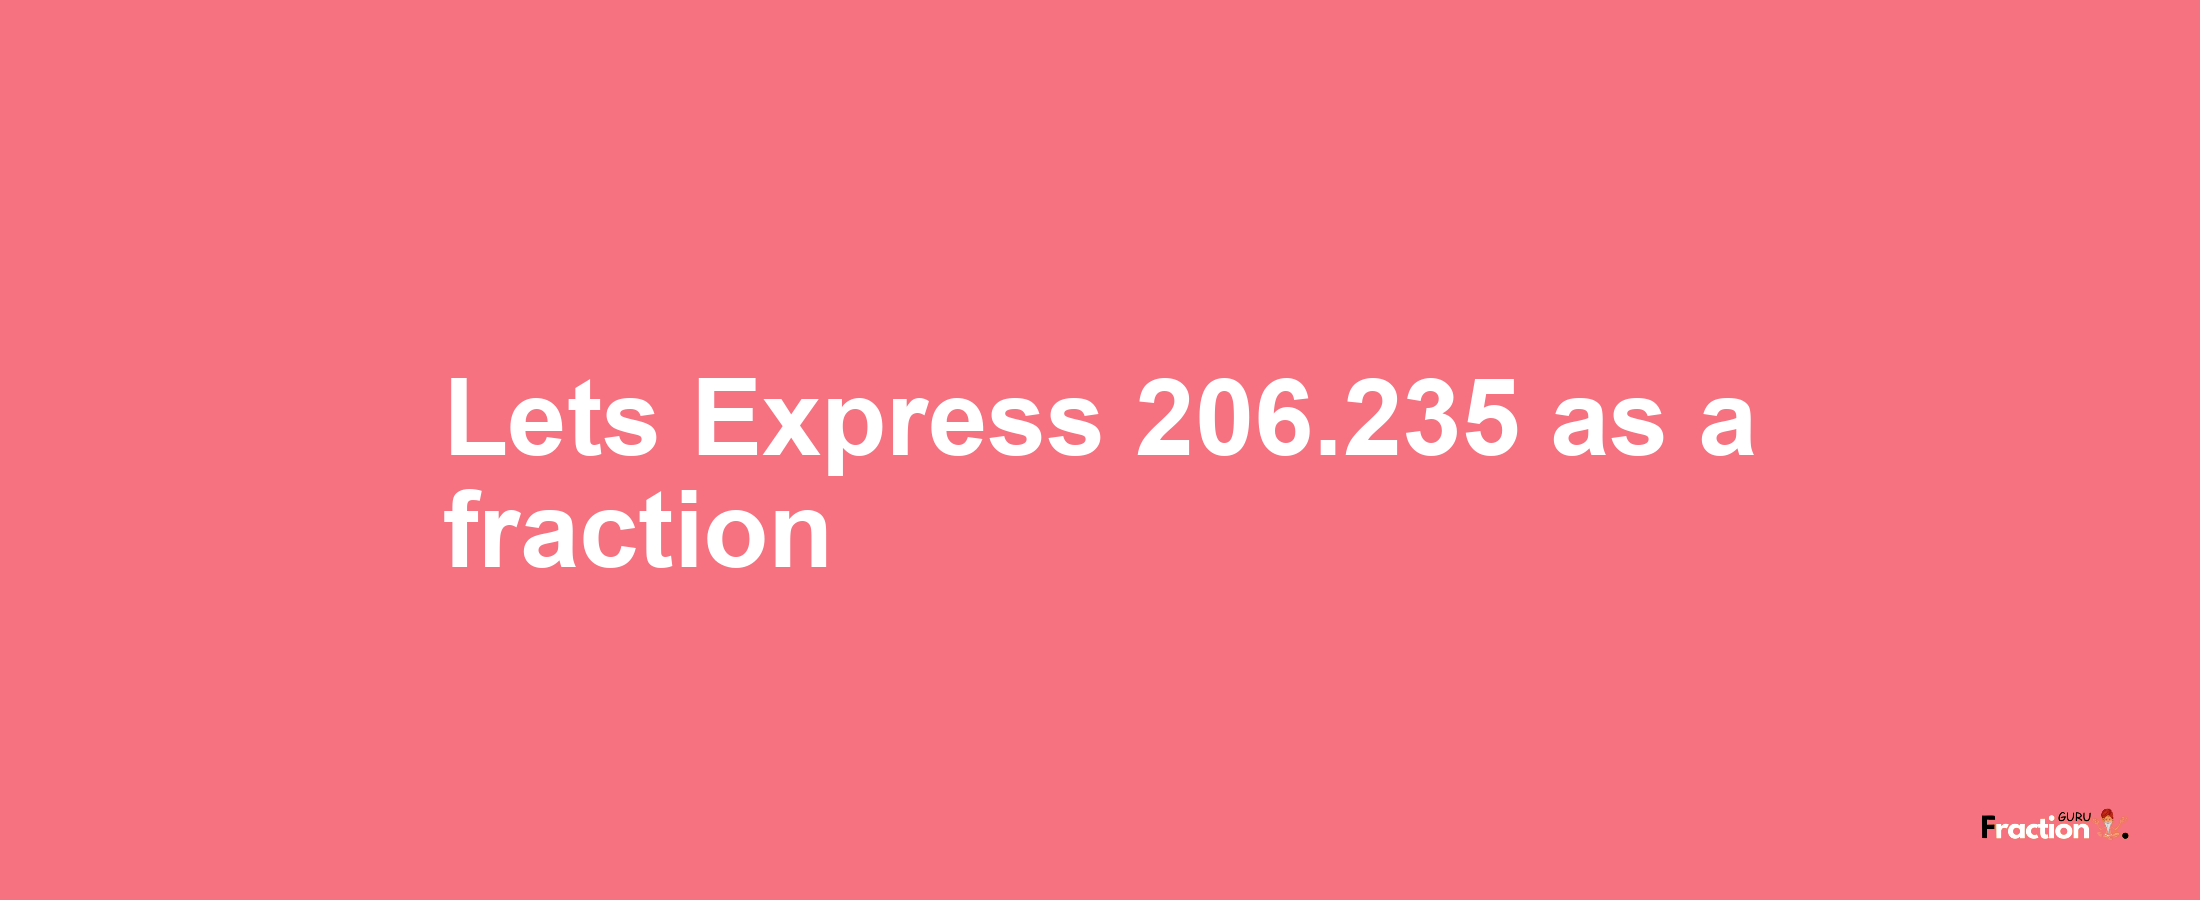 Lets Express 206.235 as afraction